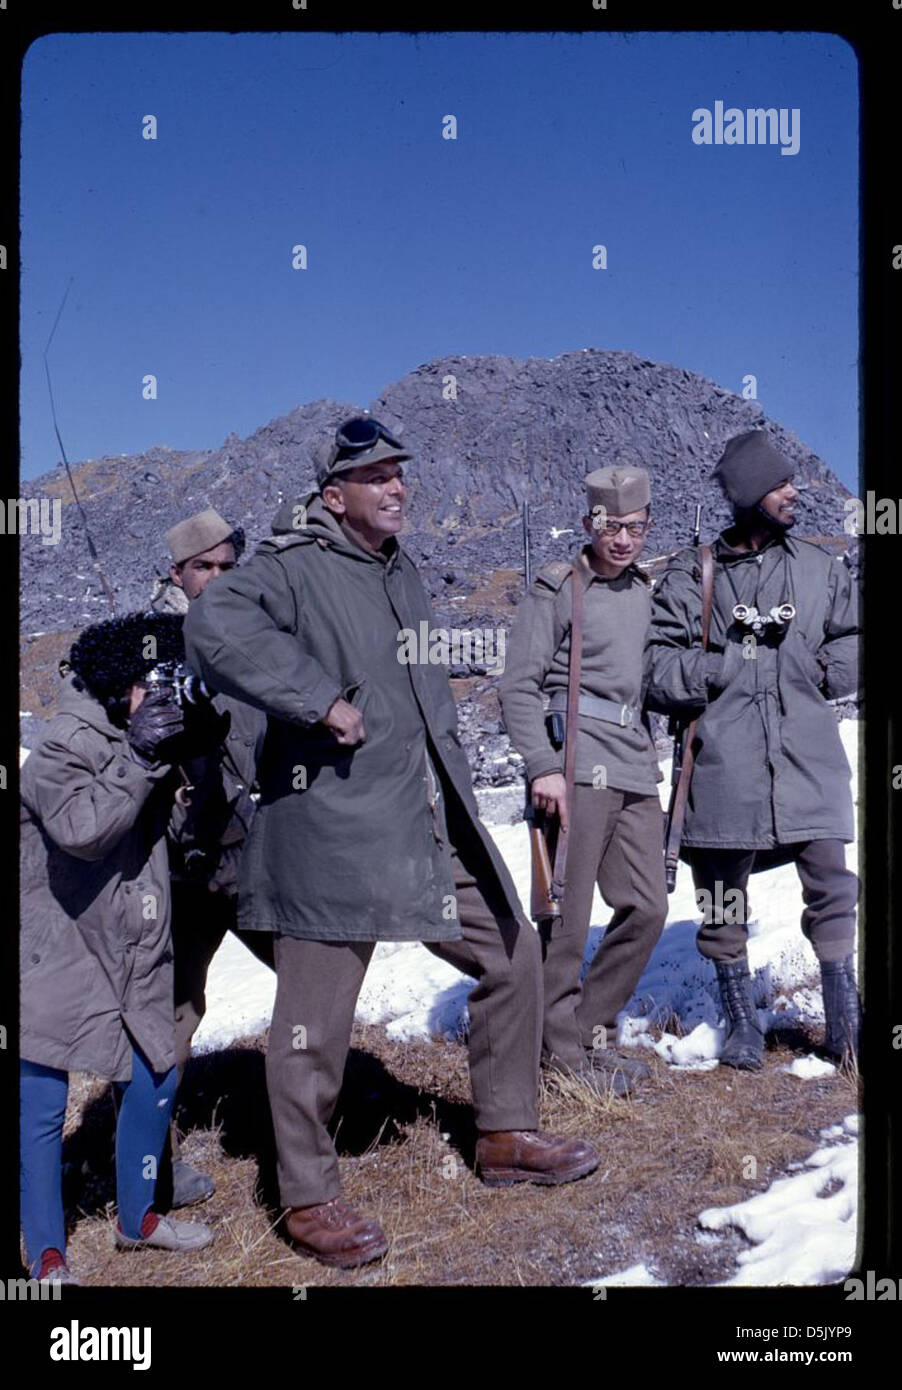 [Alice Kandell hiding behind a Sikkimese soldier to take a photograph of a Chinese soldier along the Nathu La pass, Sikkim] (LOC) Stock Photo